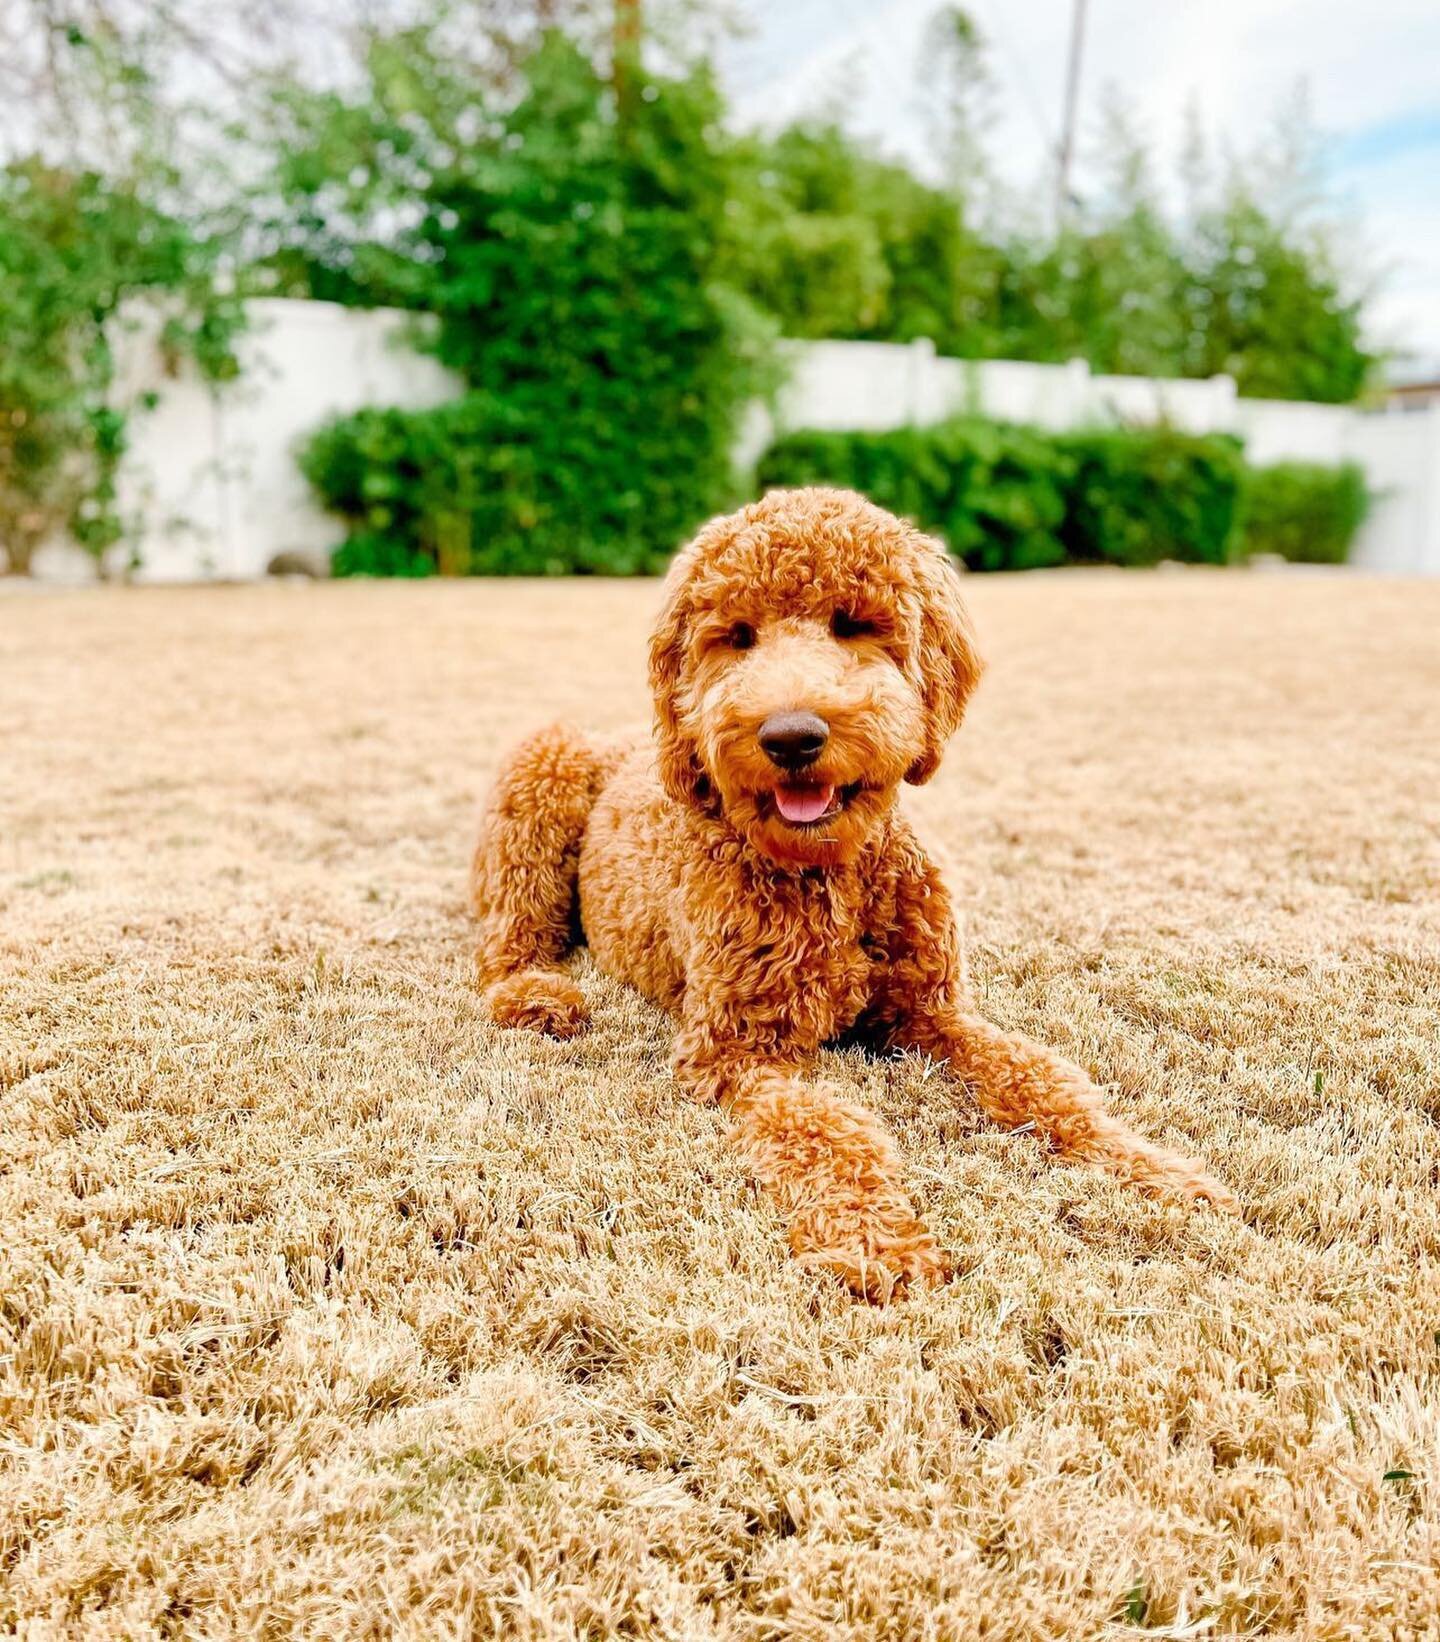 Who&rsquo;s ready for more standards??? We are going to open up deposits. Litter scheduled to arrive around June or July. We have several mommas coming up and have had several requests for standard goldendoodles. The dad will most likely be Jackie Ch